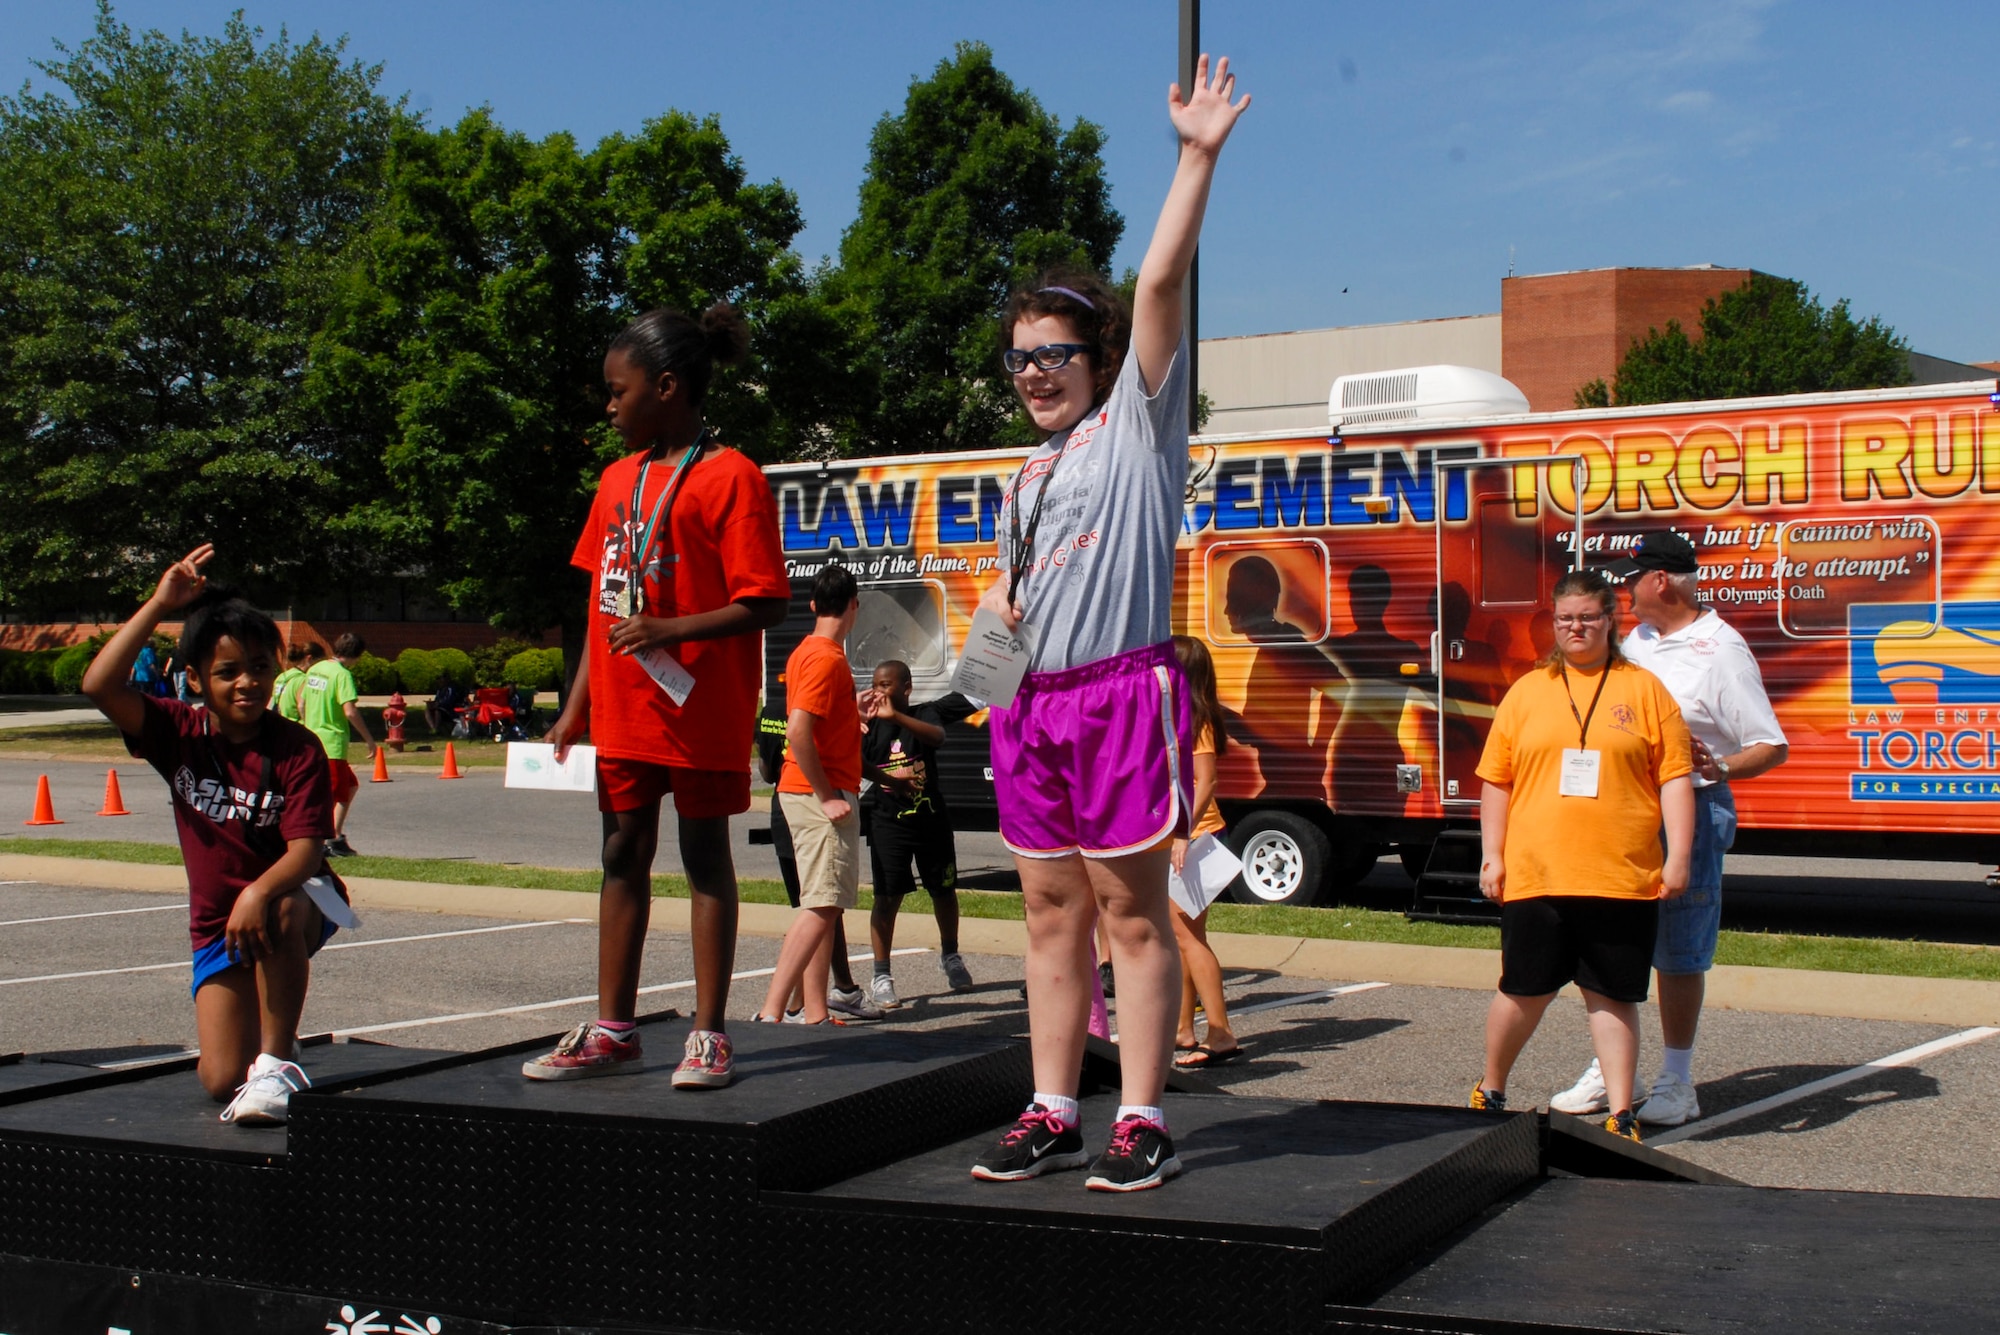 Catherine Hayes, daughter of Michael and Stephanie Hayes, celebrates on the podium at the 2013 Arkansas Summer Special Olympics May 25, 2013, at Harding University in Searcy, Ark. Hayes won the bronze medal in the 100 meter dash and also won a silver medal for the softball throw. (U.S. Air Force photo by Staff Sgt. Jacob Barreiro)